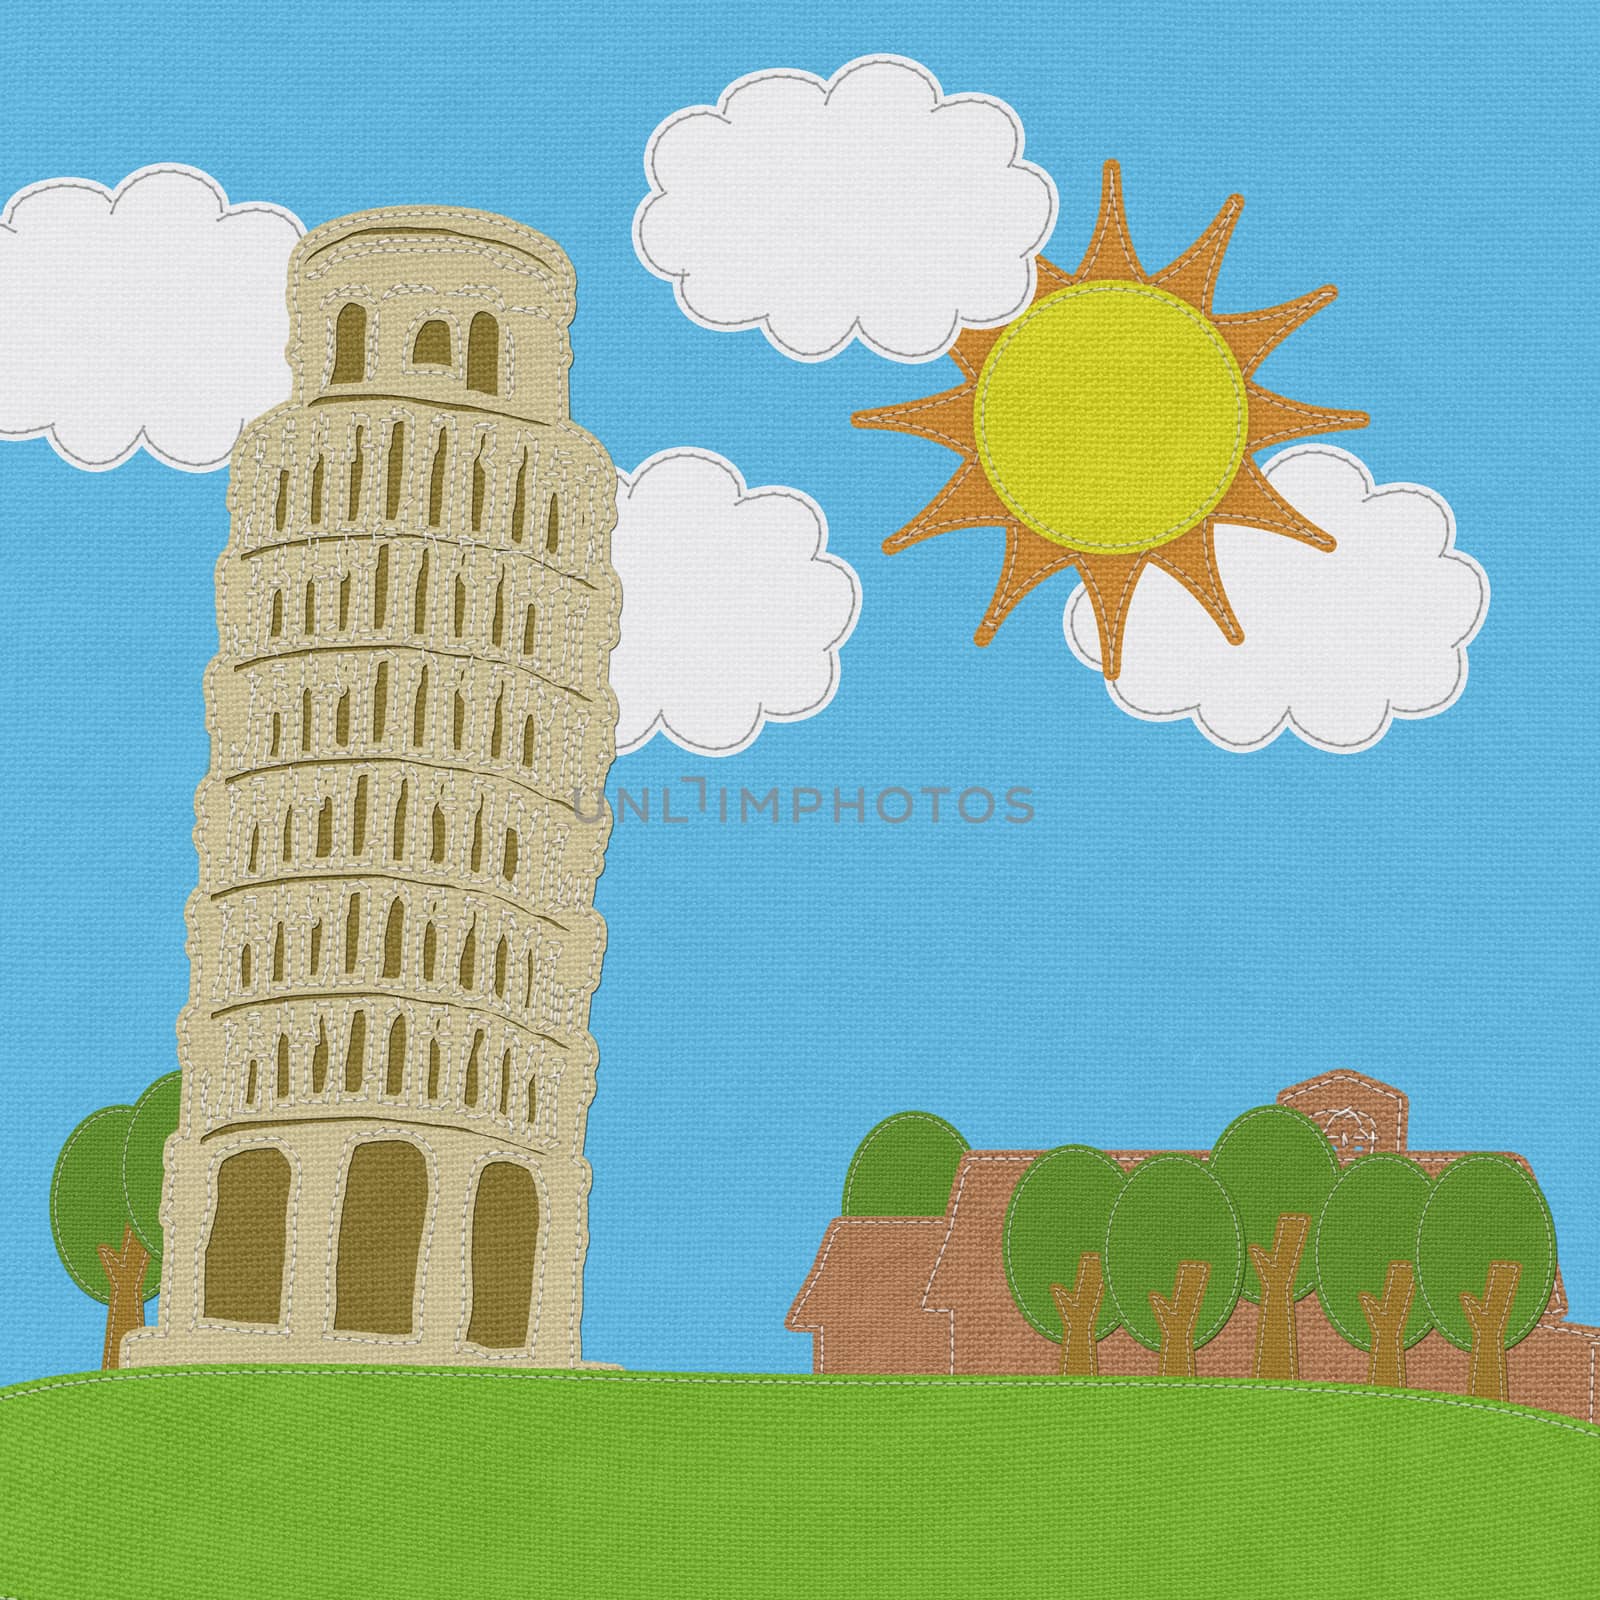 Pisa tower in stitch style on fabric background